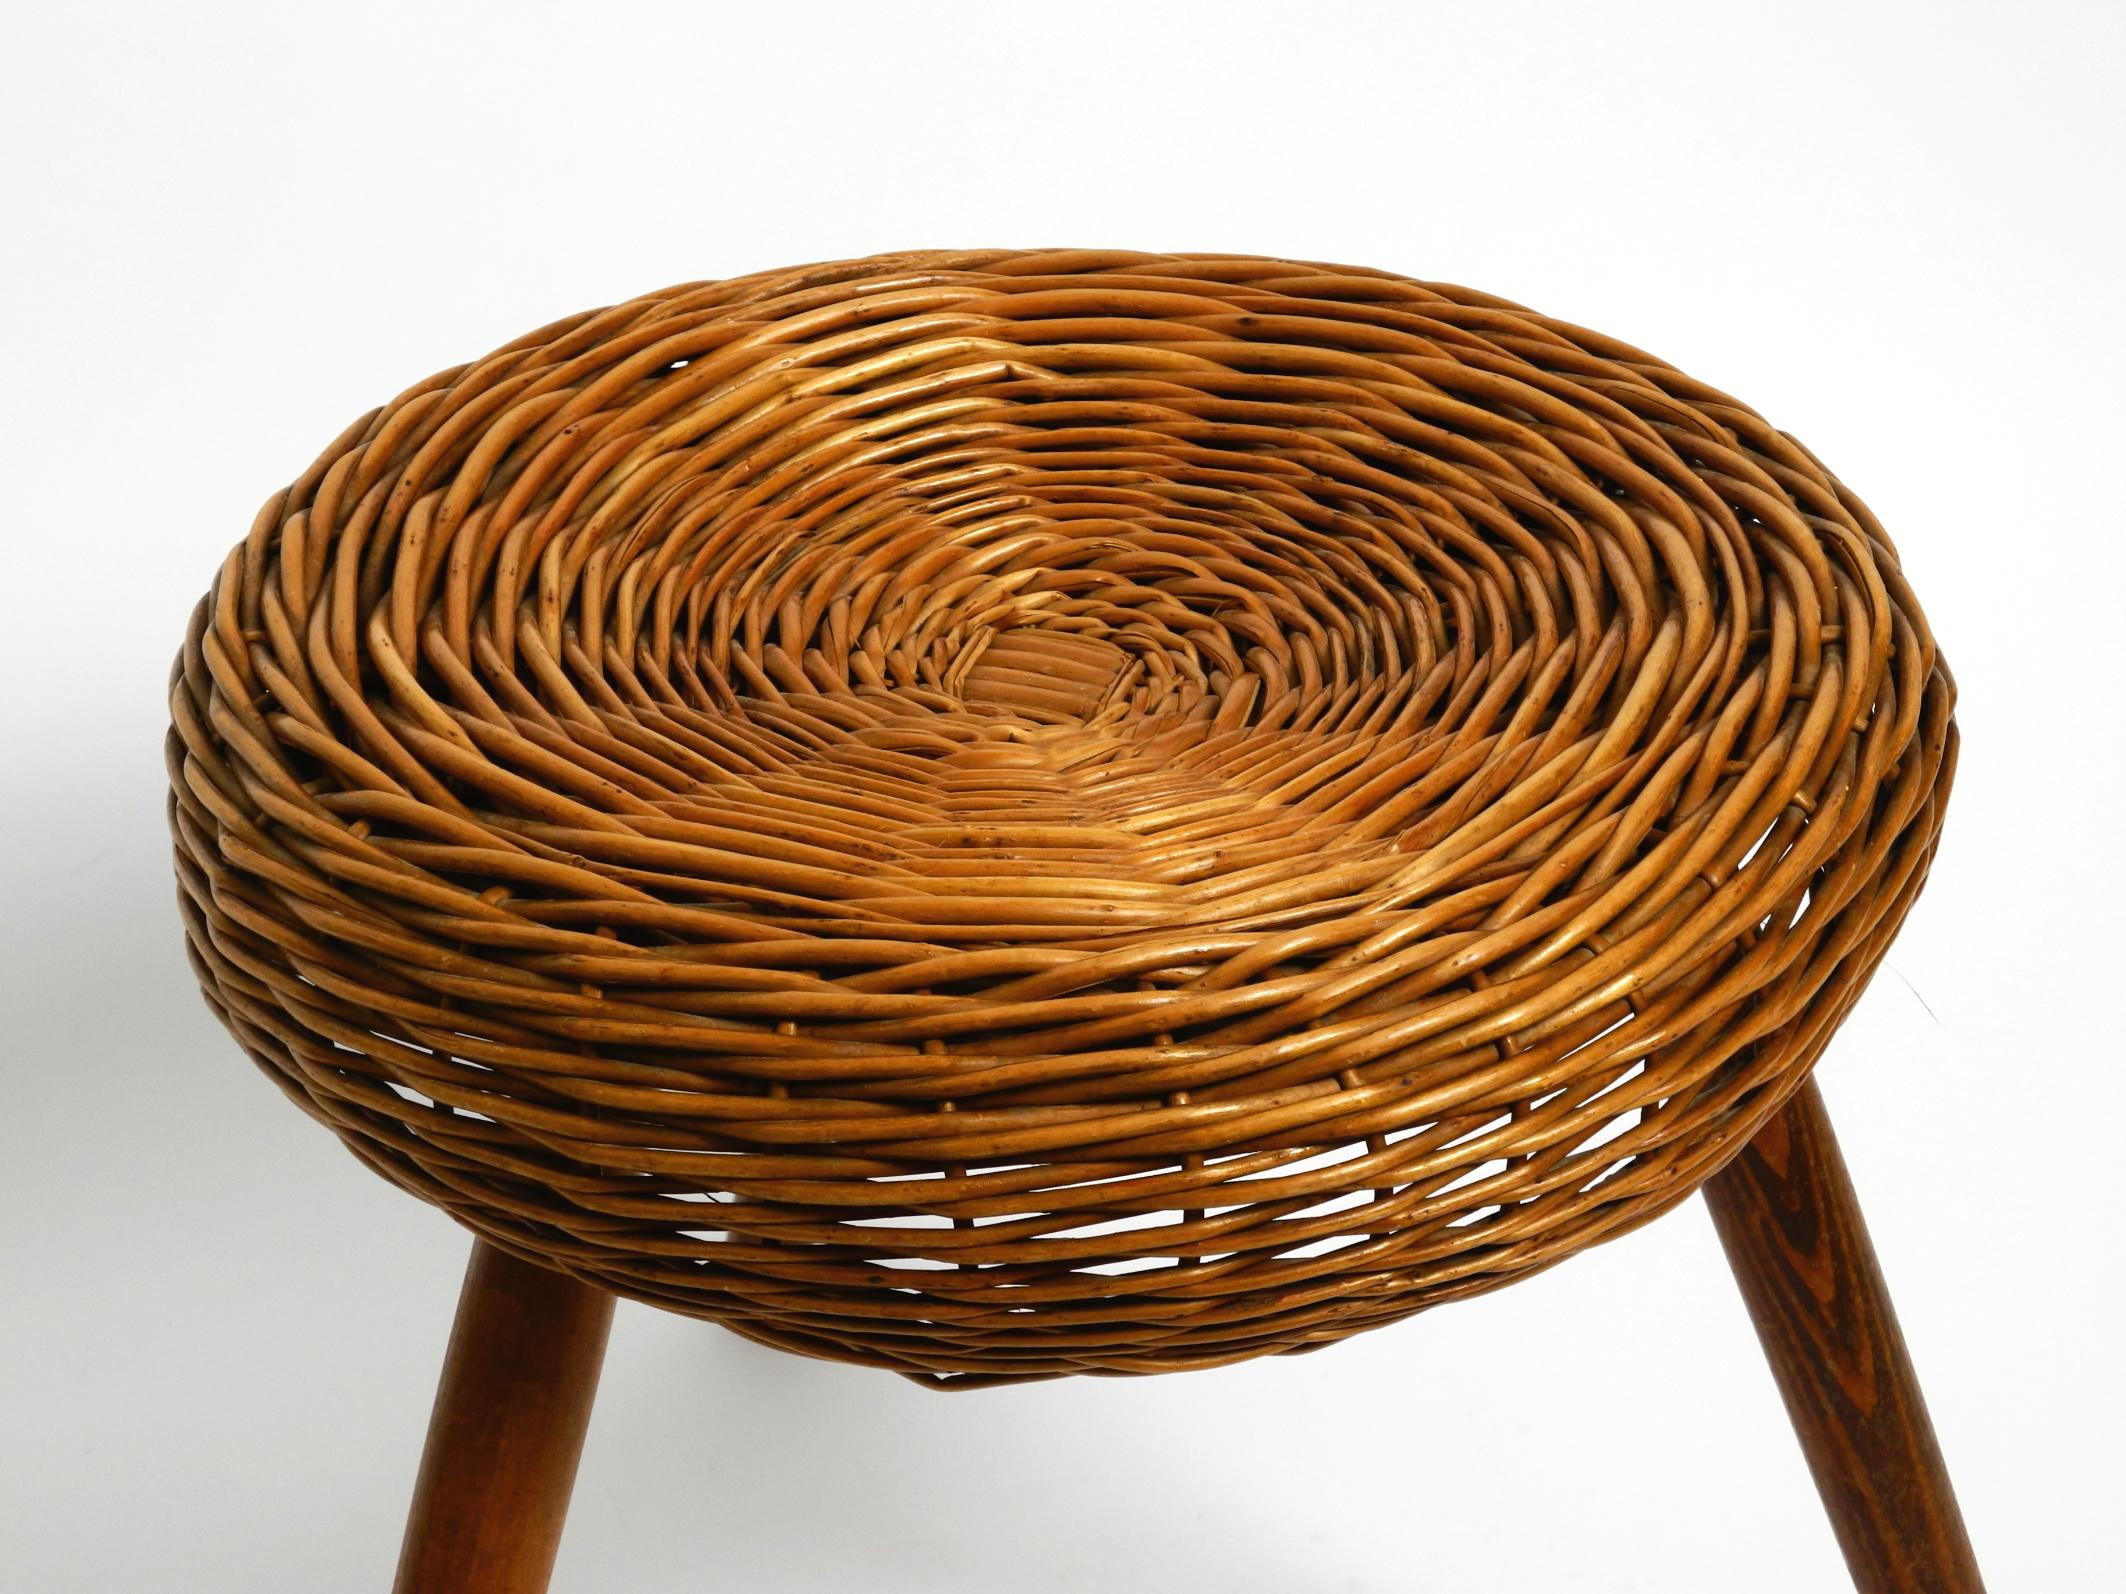 Rattan Original large Mid Century Modern rattan stool with wooden legs by Tony Paul For Sale